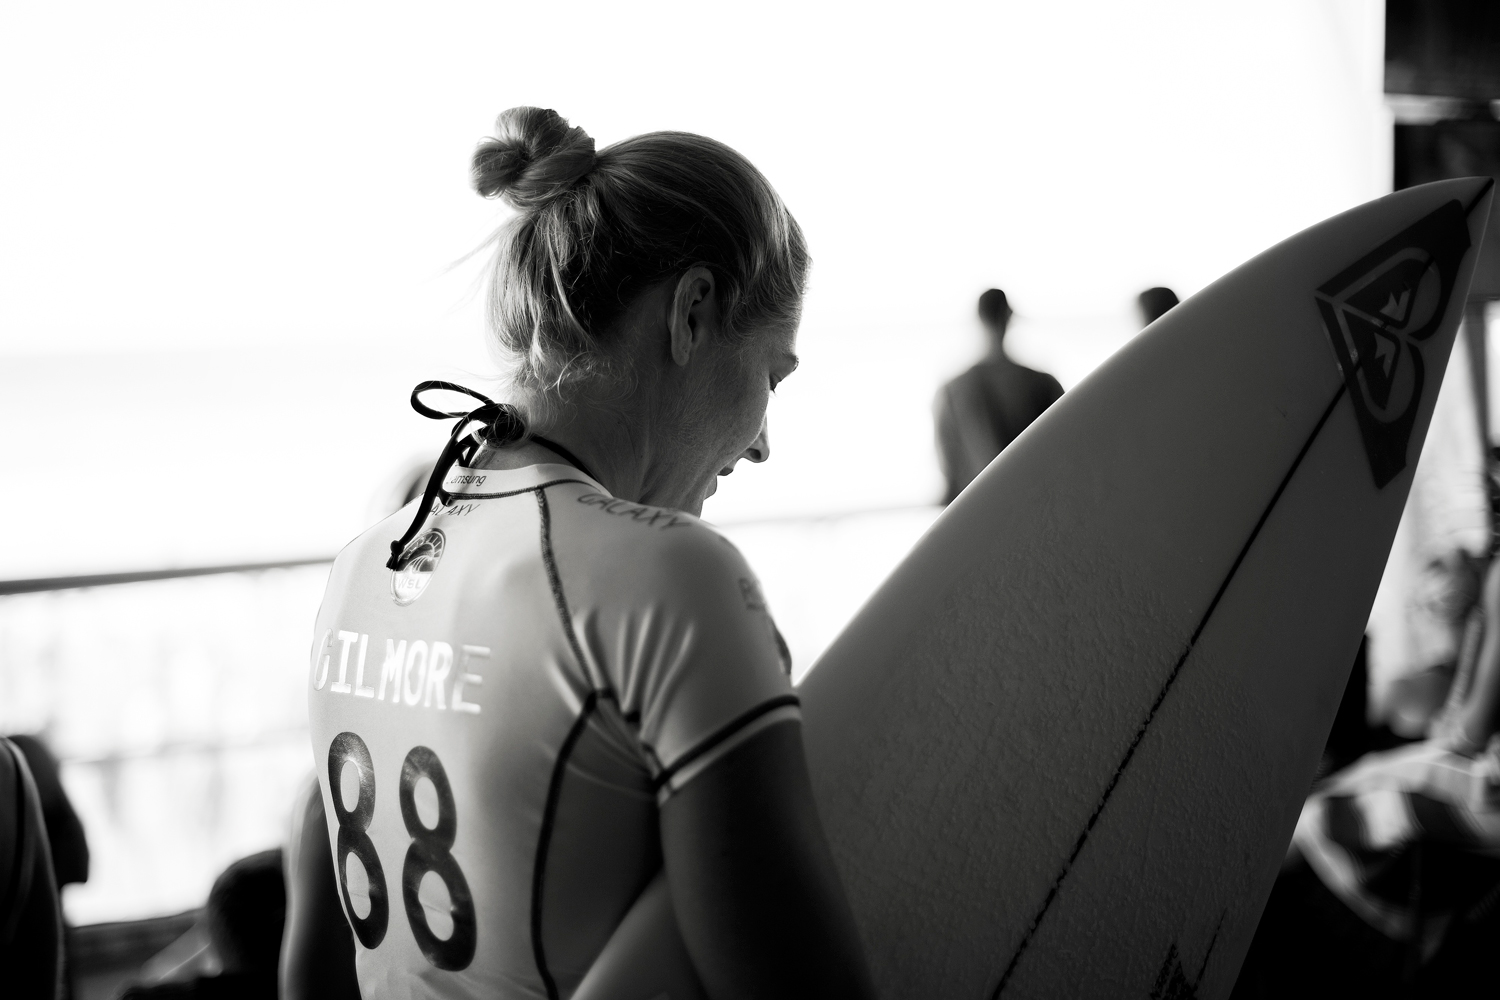 Steph Back on Board for the #ROXYpro France